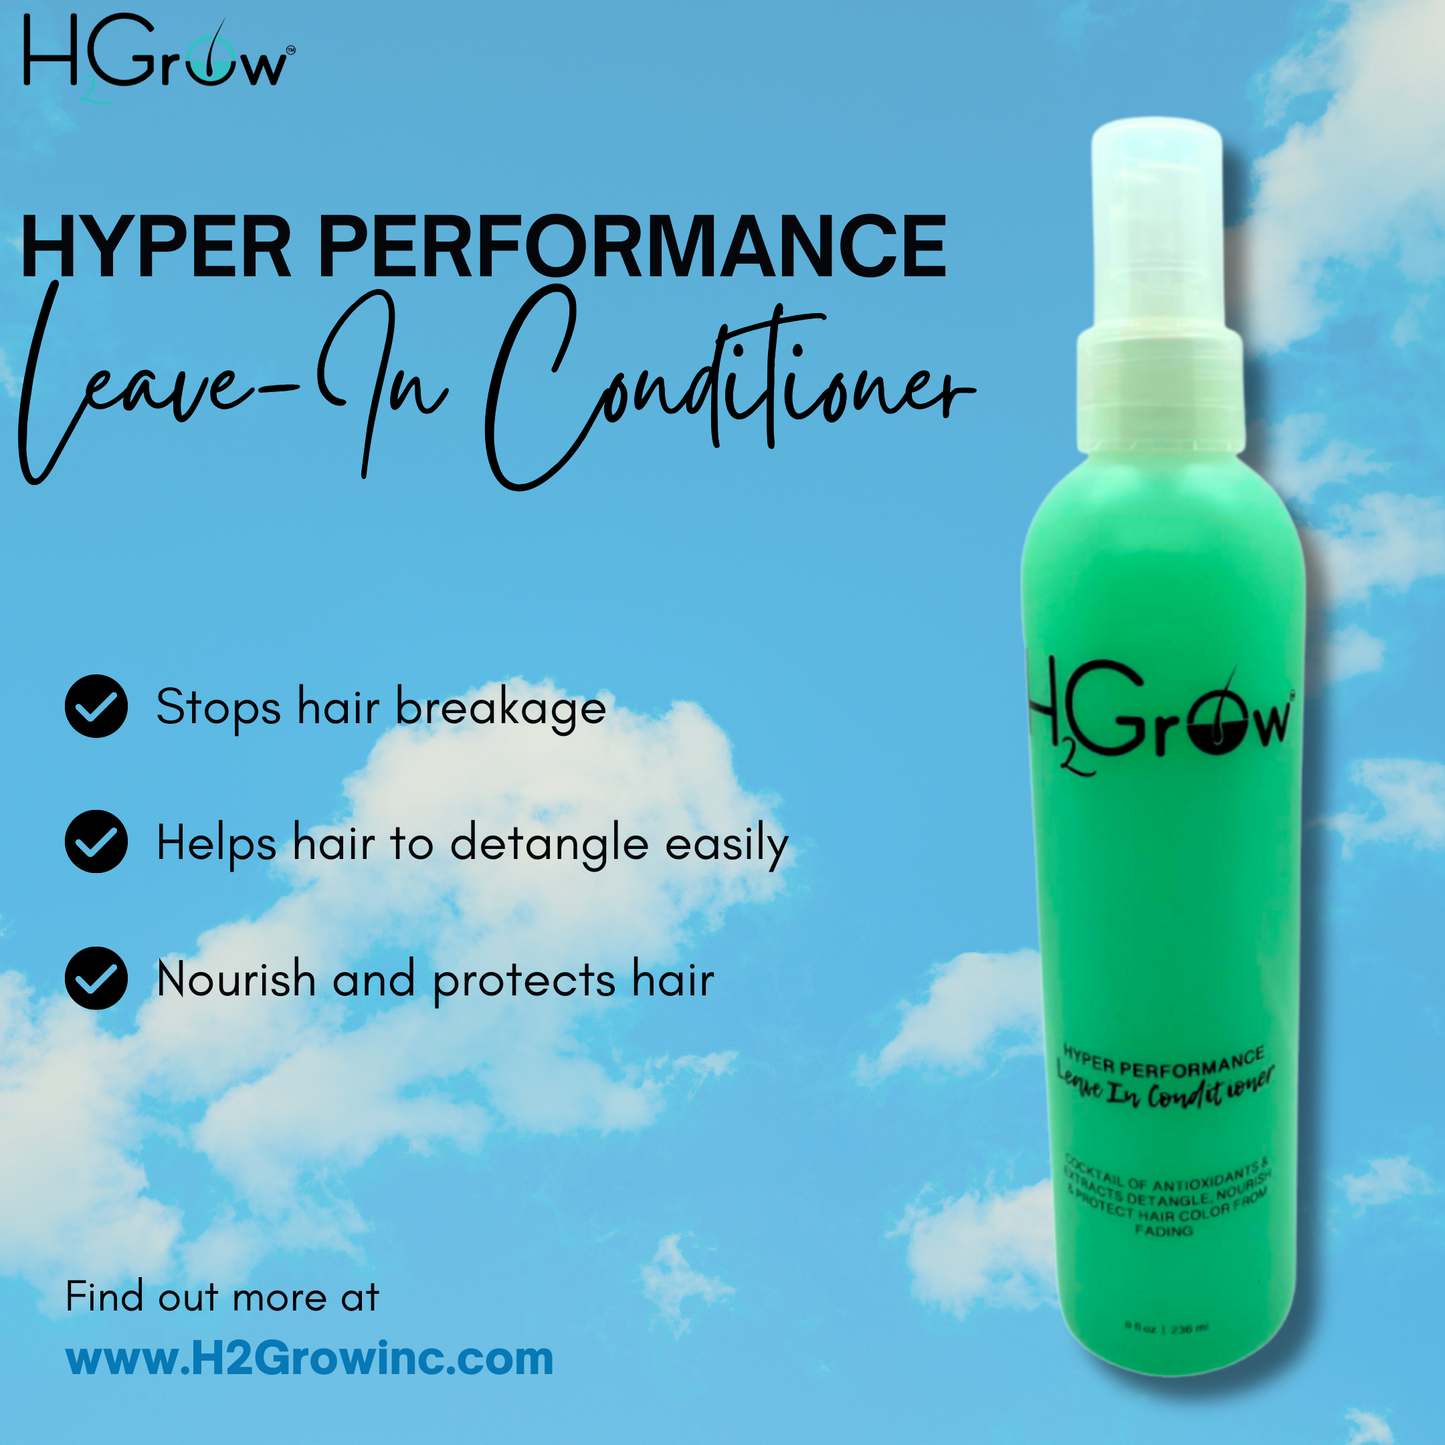 H2Grow Hyper Performance Leave in Conditioner